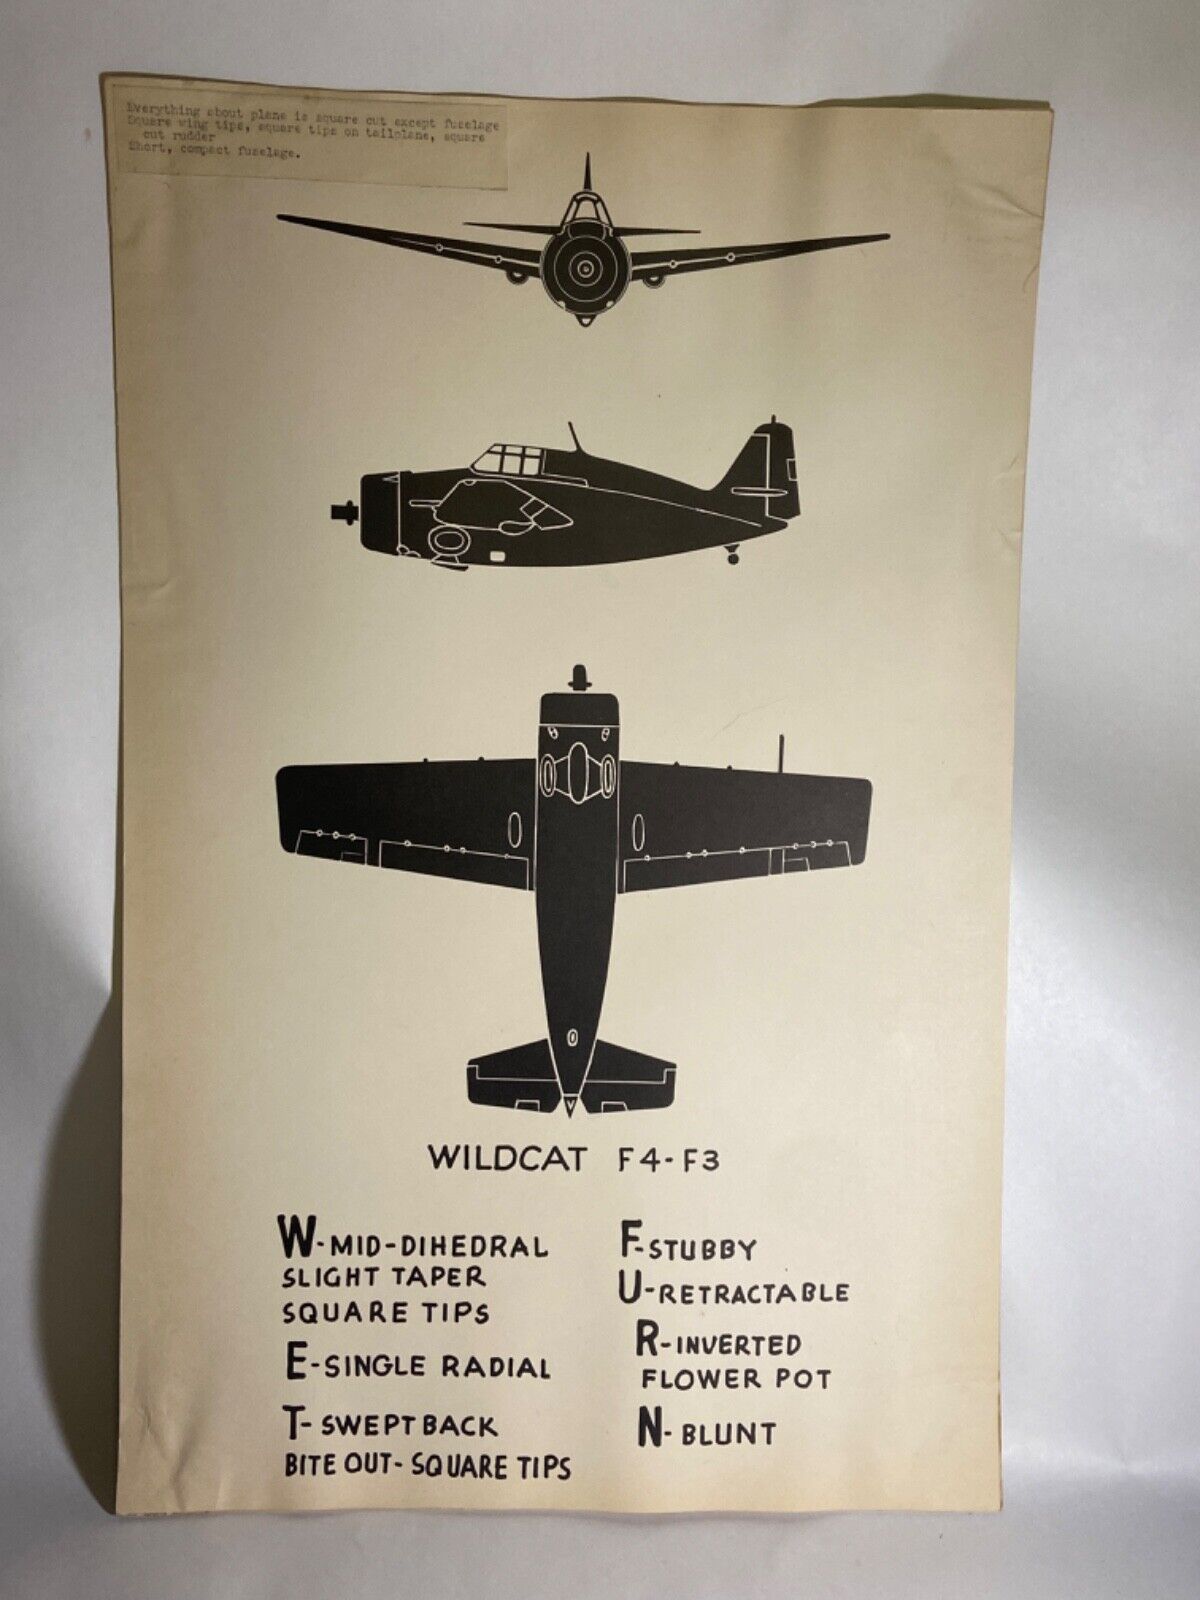 Vintage WWII Grumman F4F Wildcat Recognition Poster with Training Notes - Rare